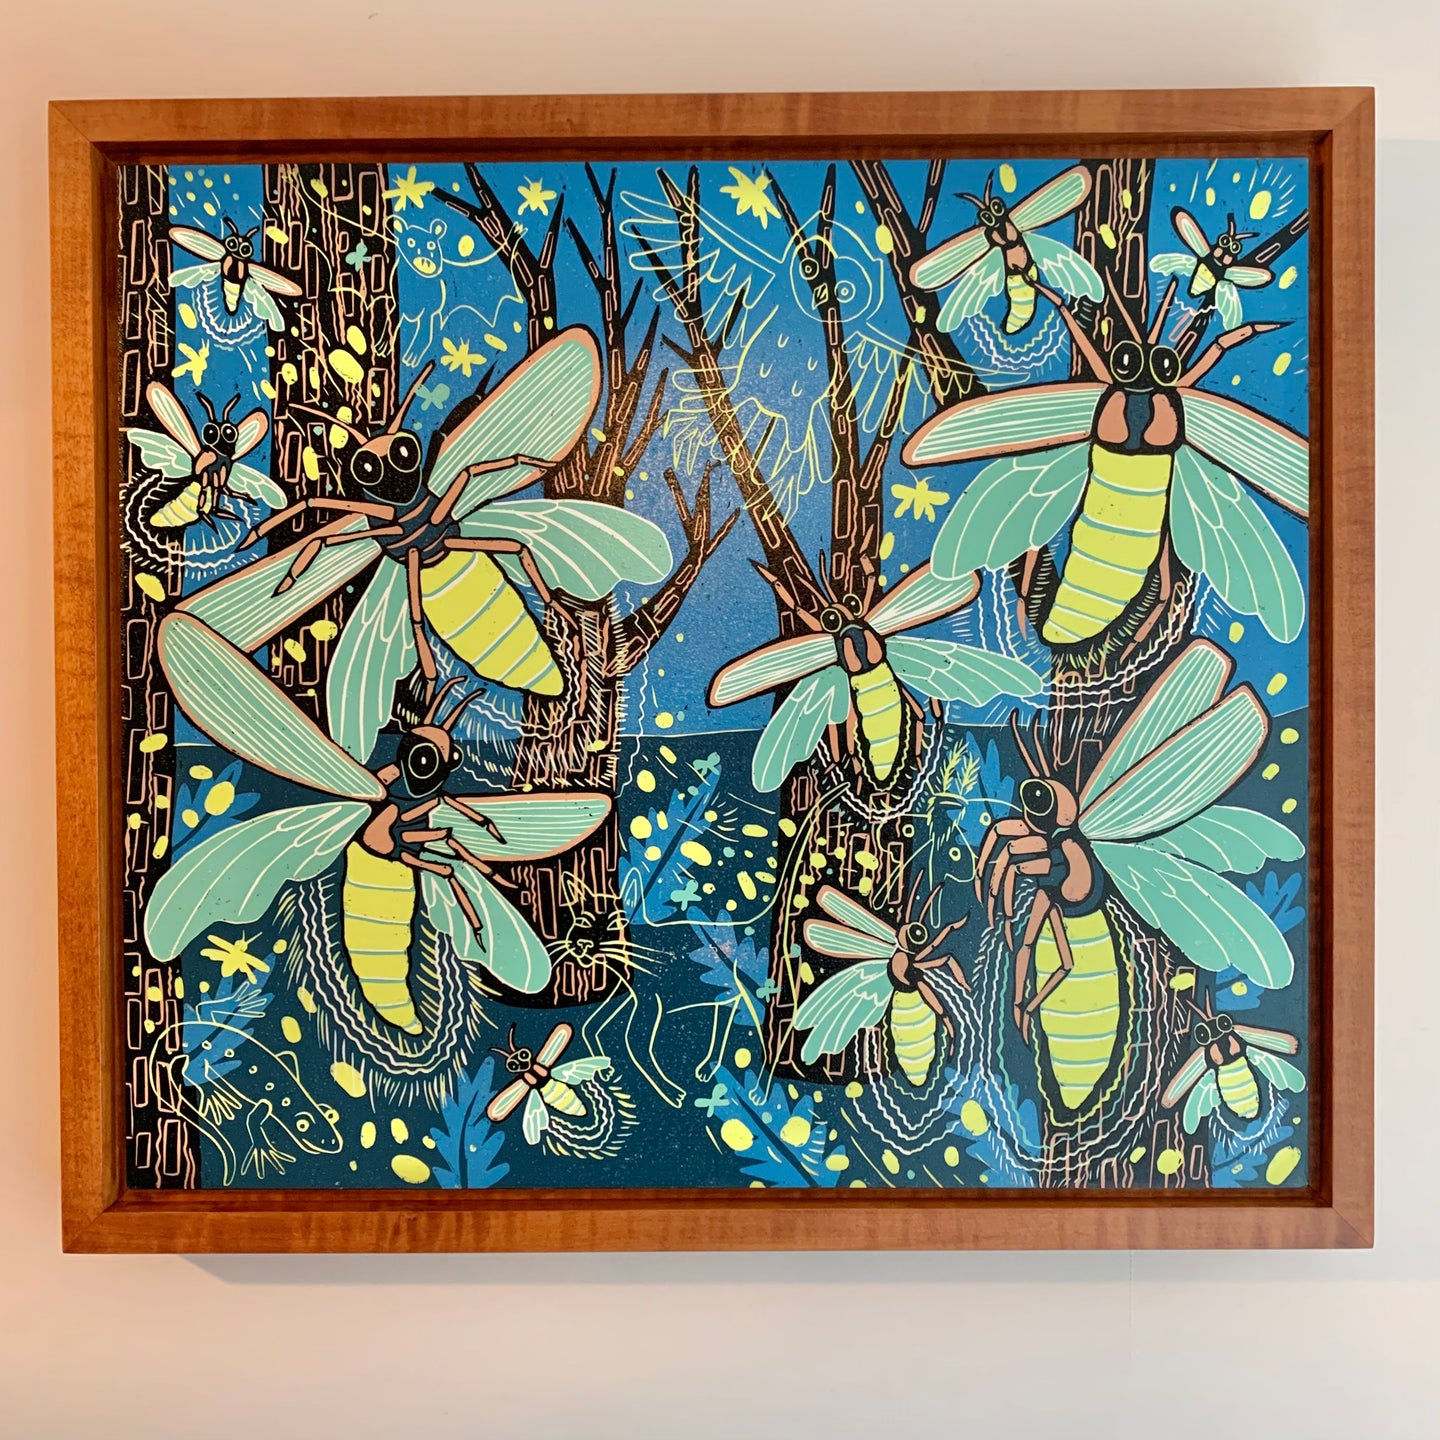 Please allow 3 weeks for delivery—lightning bug woodcut framed in nutmeg